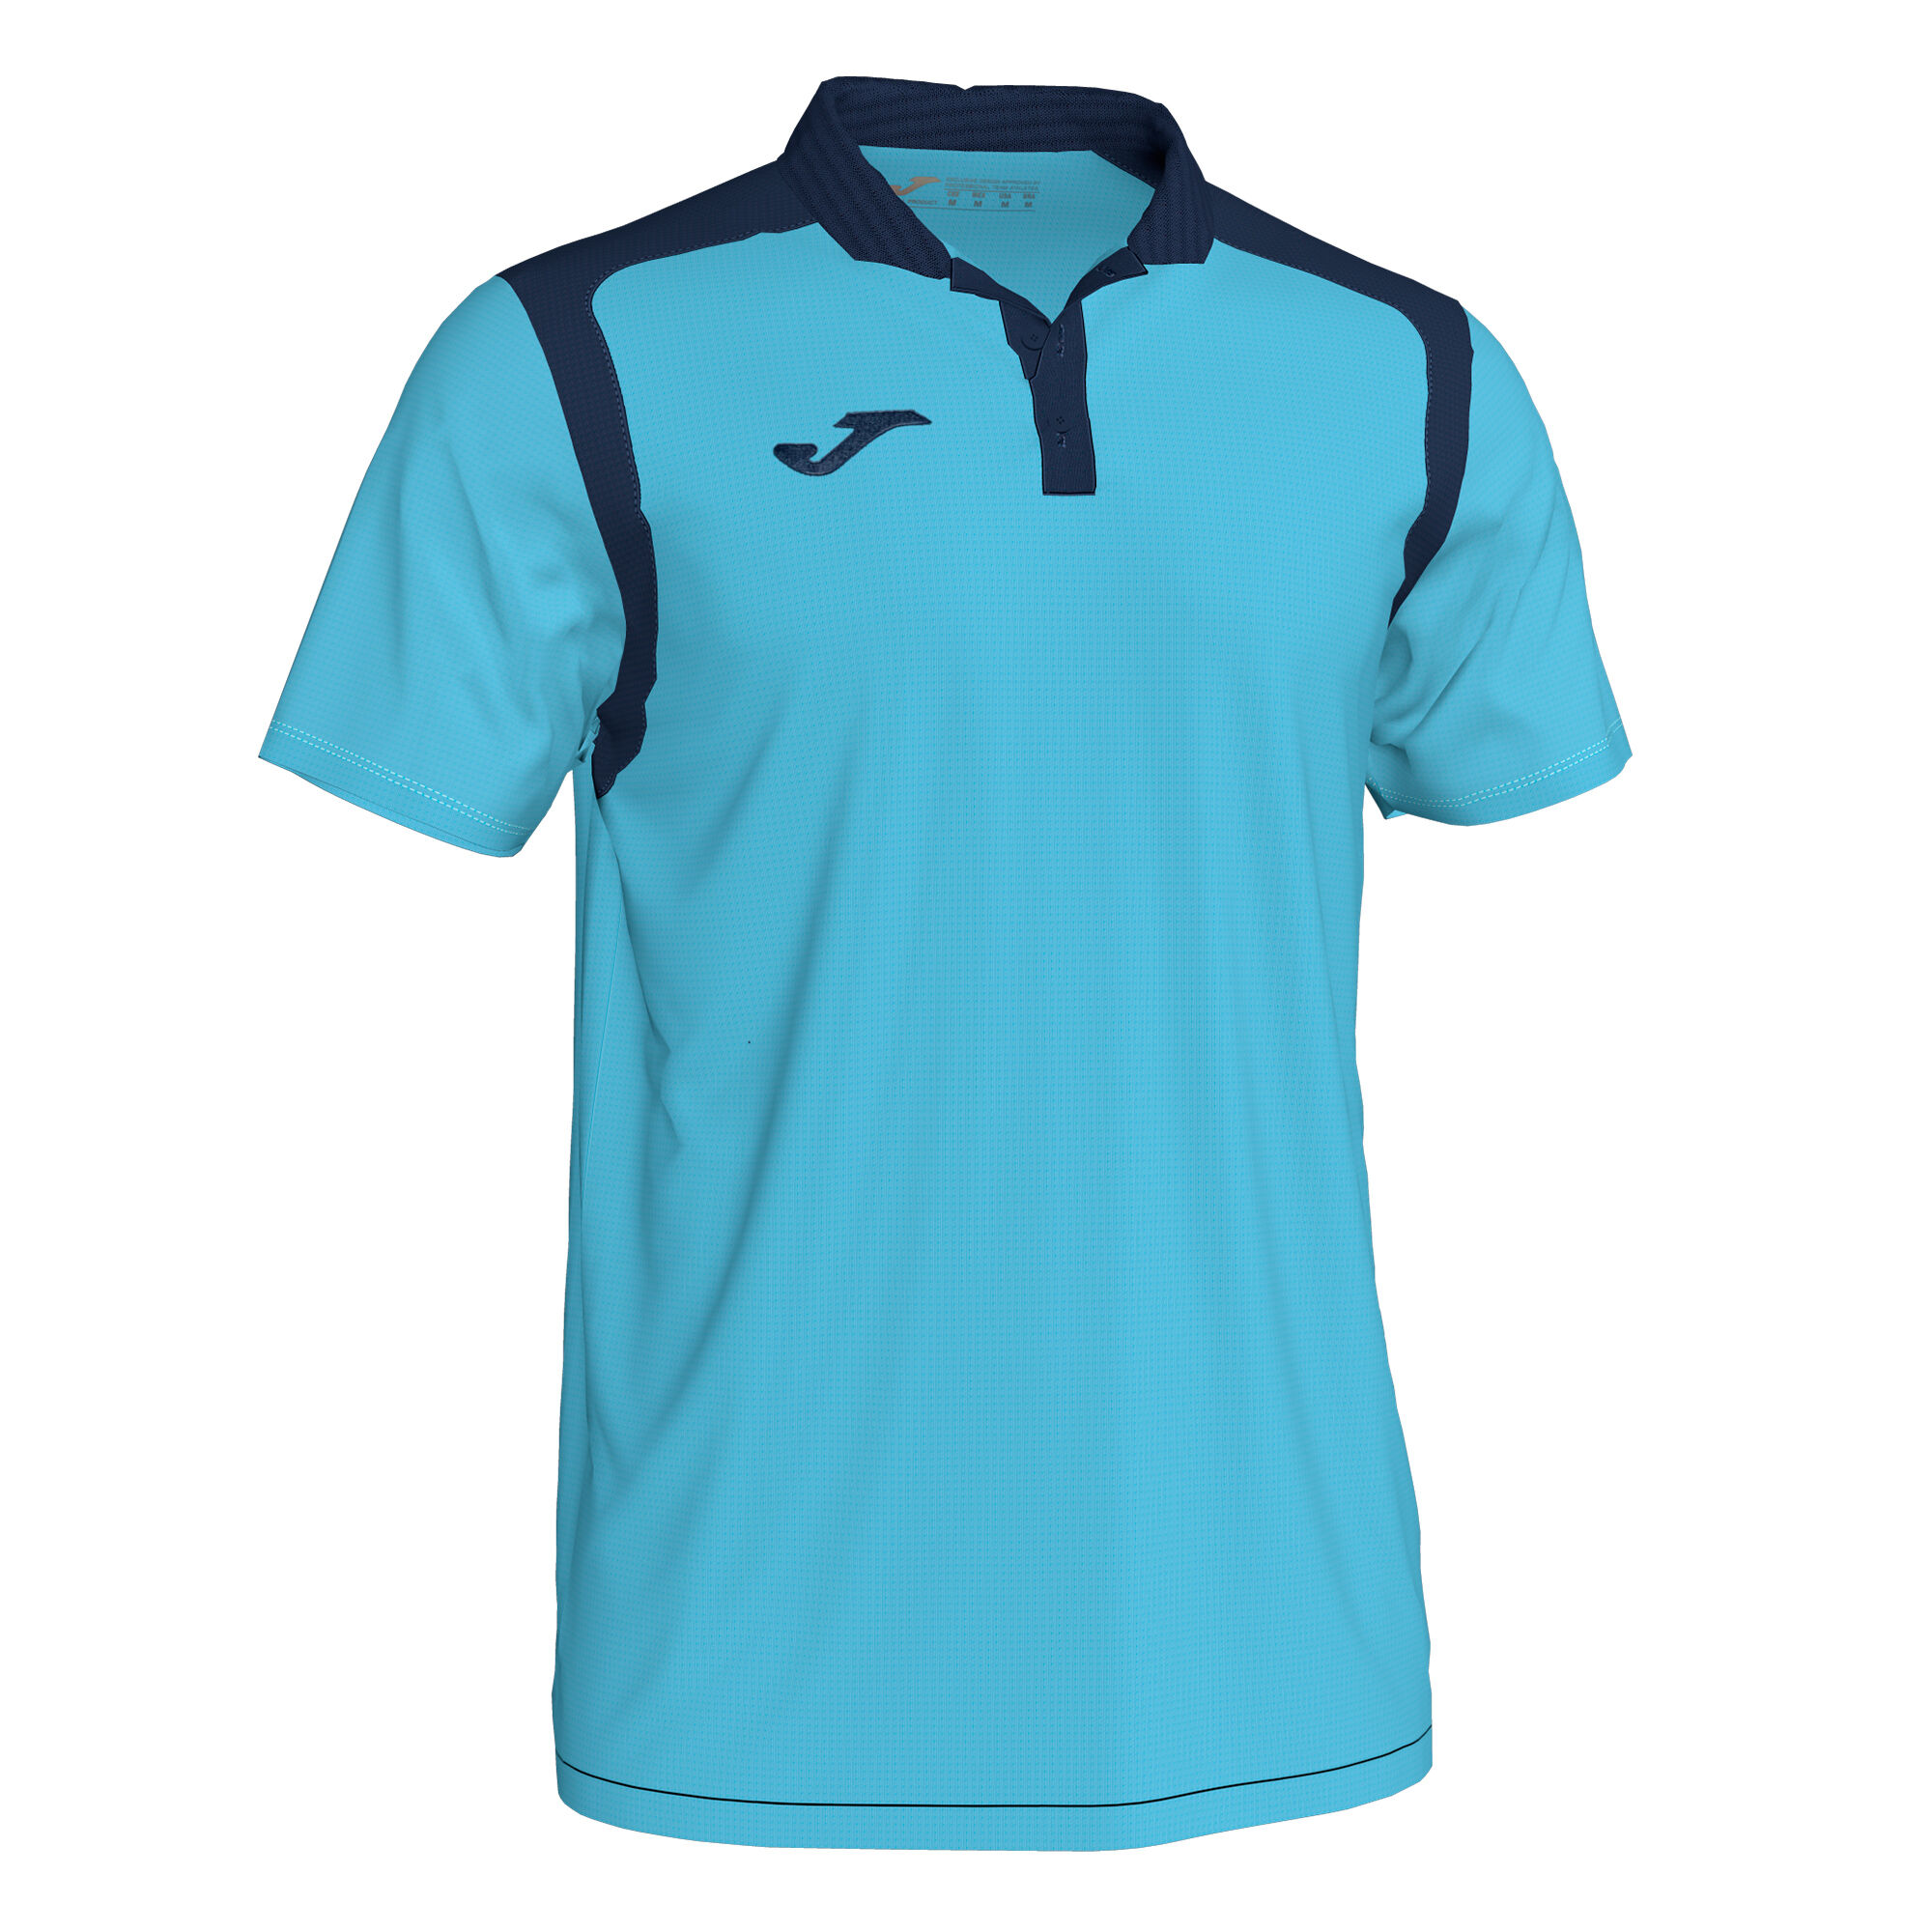 Polo manches courtes homme Championship V turquoise fluo bleu marine